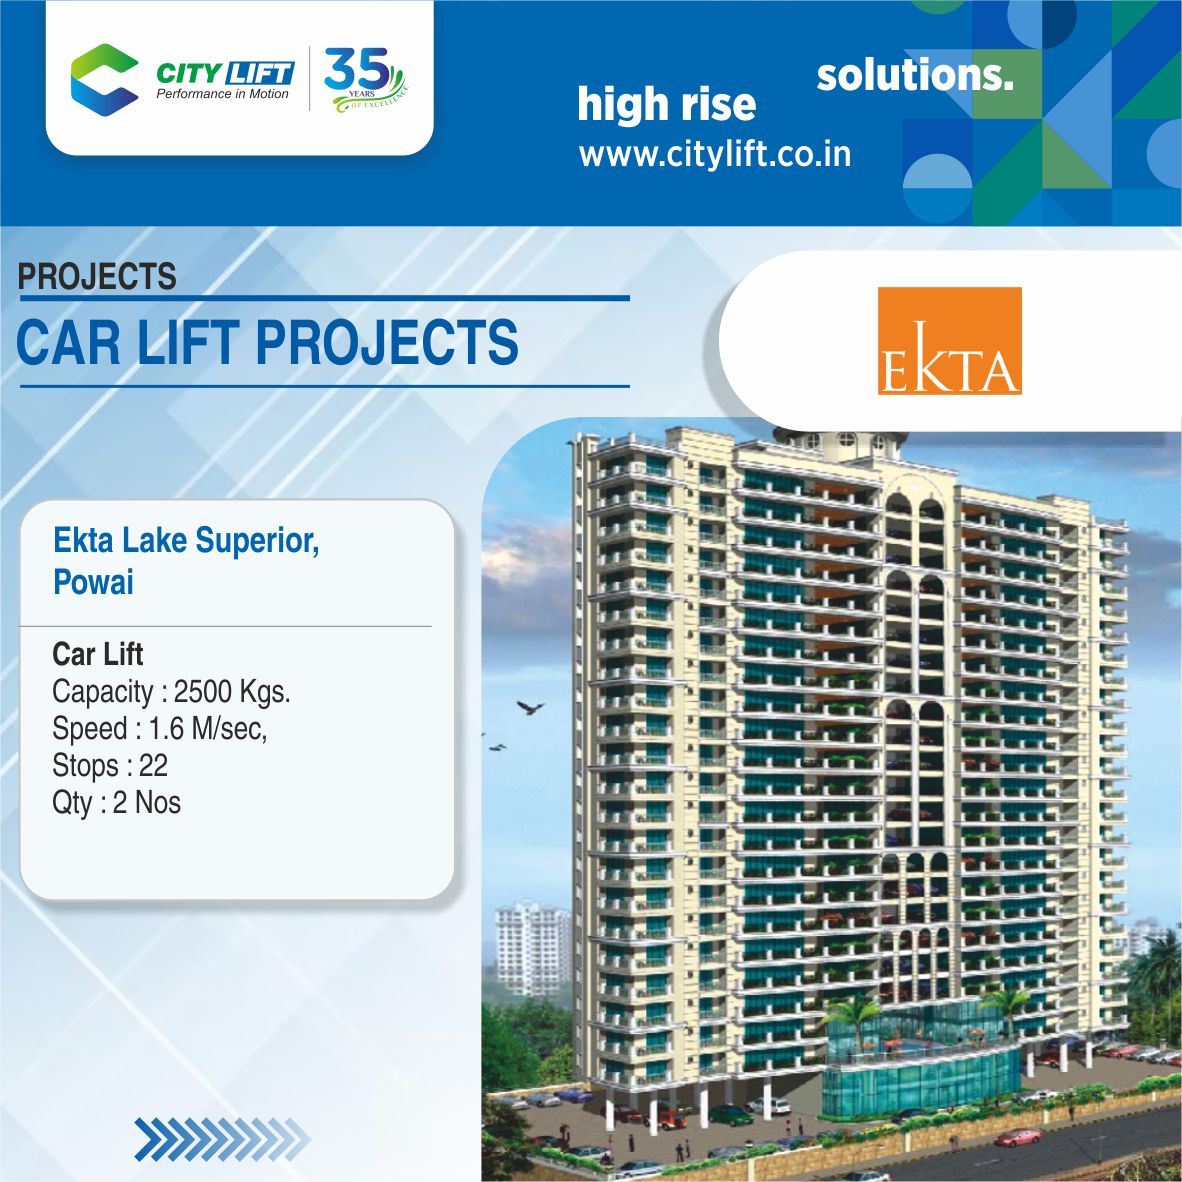 CAR-LIFT PROJECTS